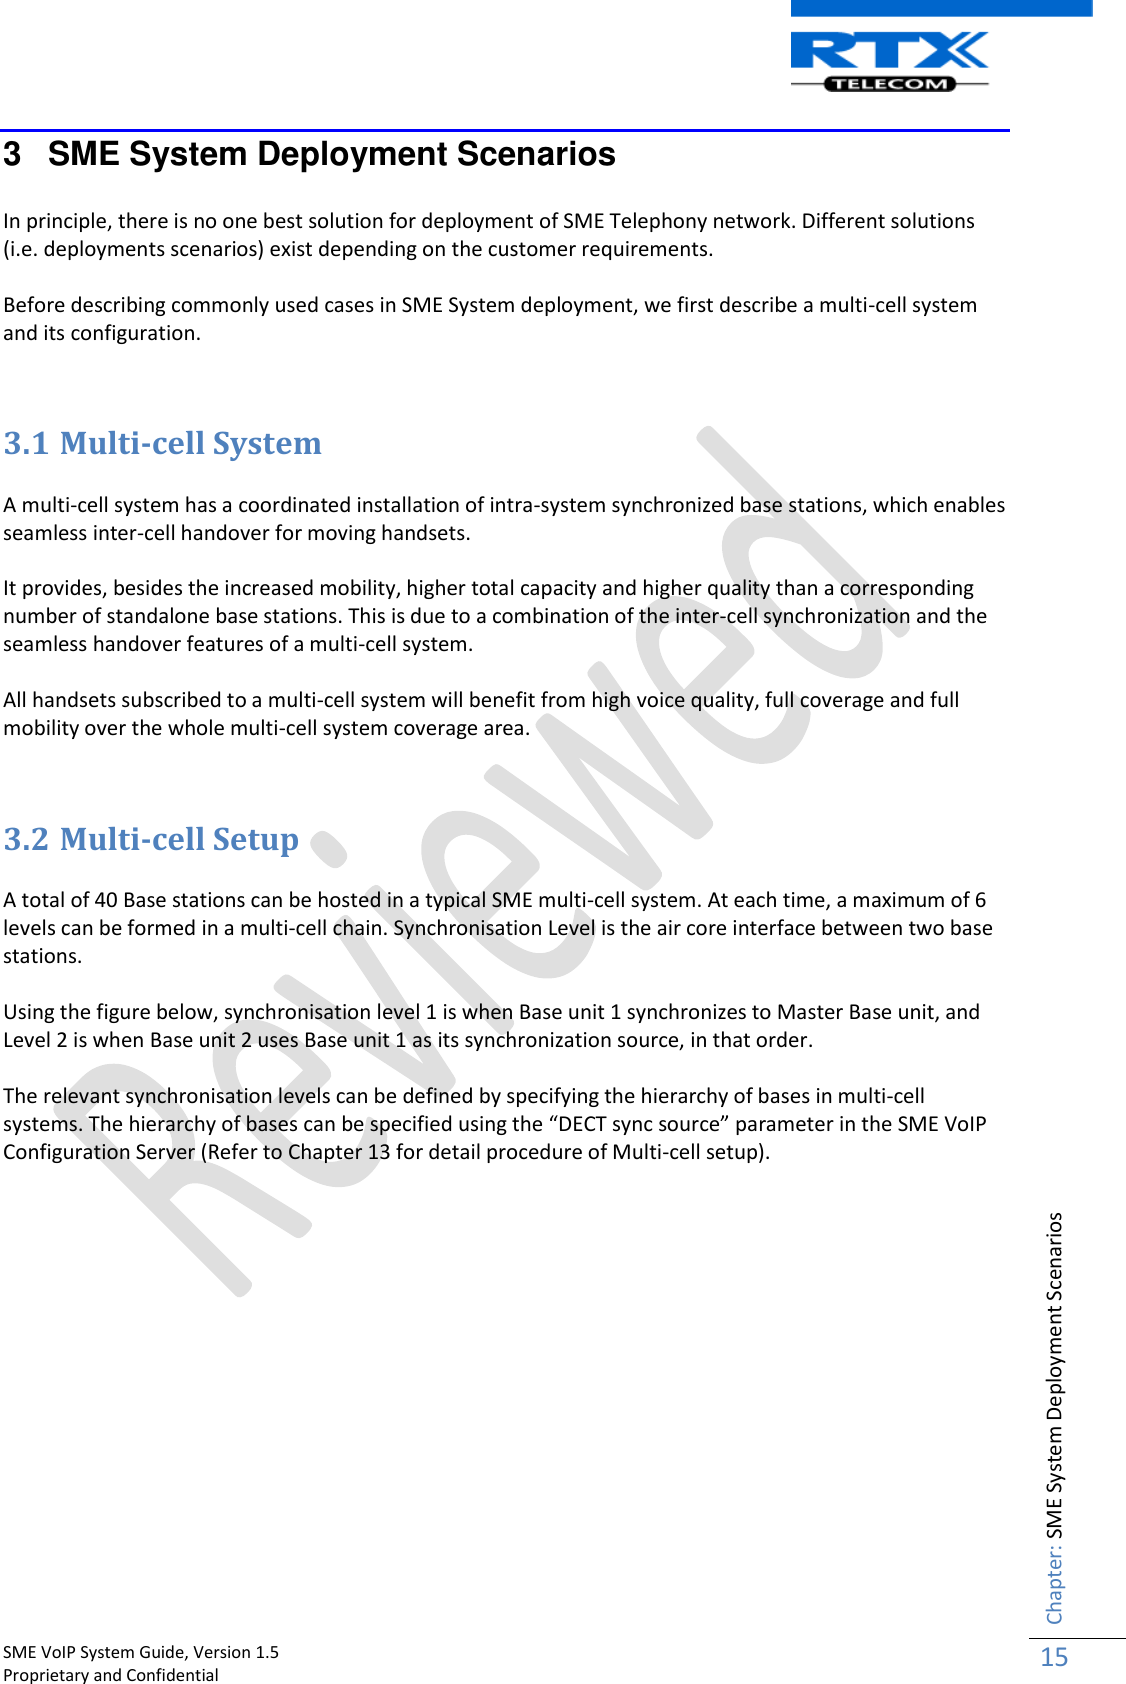    SME VoIP System Guide, Version 1.5                                                                                                                                                          Proprietary and Confidential    Chapter: SME System Deployment Scenarios 15  3  SME System Deployment Scenarios  In principle, there is no one best solution for deployment of SME Telephony network. Different solutions (i.e. deployments scenarios) exist depending on the customer requirements.   Before describing commonly used cases in SME System deployment, we first describe a multi-cell system and its configuration.   3.1 Multi-cell System  A multi-cell system has a coordinated installation of intra-system synchronized base stations, which enables seamless inter-cell handover for moving handsets.  It provides, besides the increased mobility, higher total capacity and higher quality than a corresponding number of standalone base stations. This is due to a combination of the inter-cell synchronization and the seamless handover features of a multi-cell system.  All handsets subscribed to a multi-cell system will benefit from high voice quality, full coverage and full mobility over the whole multi-cell system coverage area.   3.2 Multi-cell Setup  A total of 40 Base stations can be hosted in a typical SME multi-cell system. At each time, a maximum of 6 levels can be formed in a multi-cell chain. Synchronisation Level is the air core interface between two base stations.  Using the figure below, synchronisation level 1 is when Base unit 1 synchronizes to Master Base unit, and Level 2 is when Base unit 2 uses Base unit 1 as its synchronization source, in that order.   The relevant synchronisation levels can be defined by specifying the hierarchy of bases in multi-cell systems. The hierarchy of bases can be specified using the “DECT sync source” parameter in the SME VoIP Configuration Server (Refer to Chapter 13 for detail procedure of Multi-cell setup). 